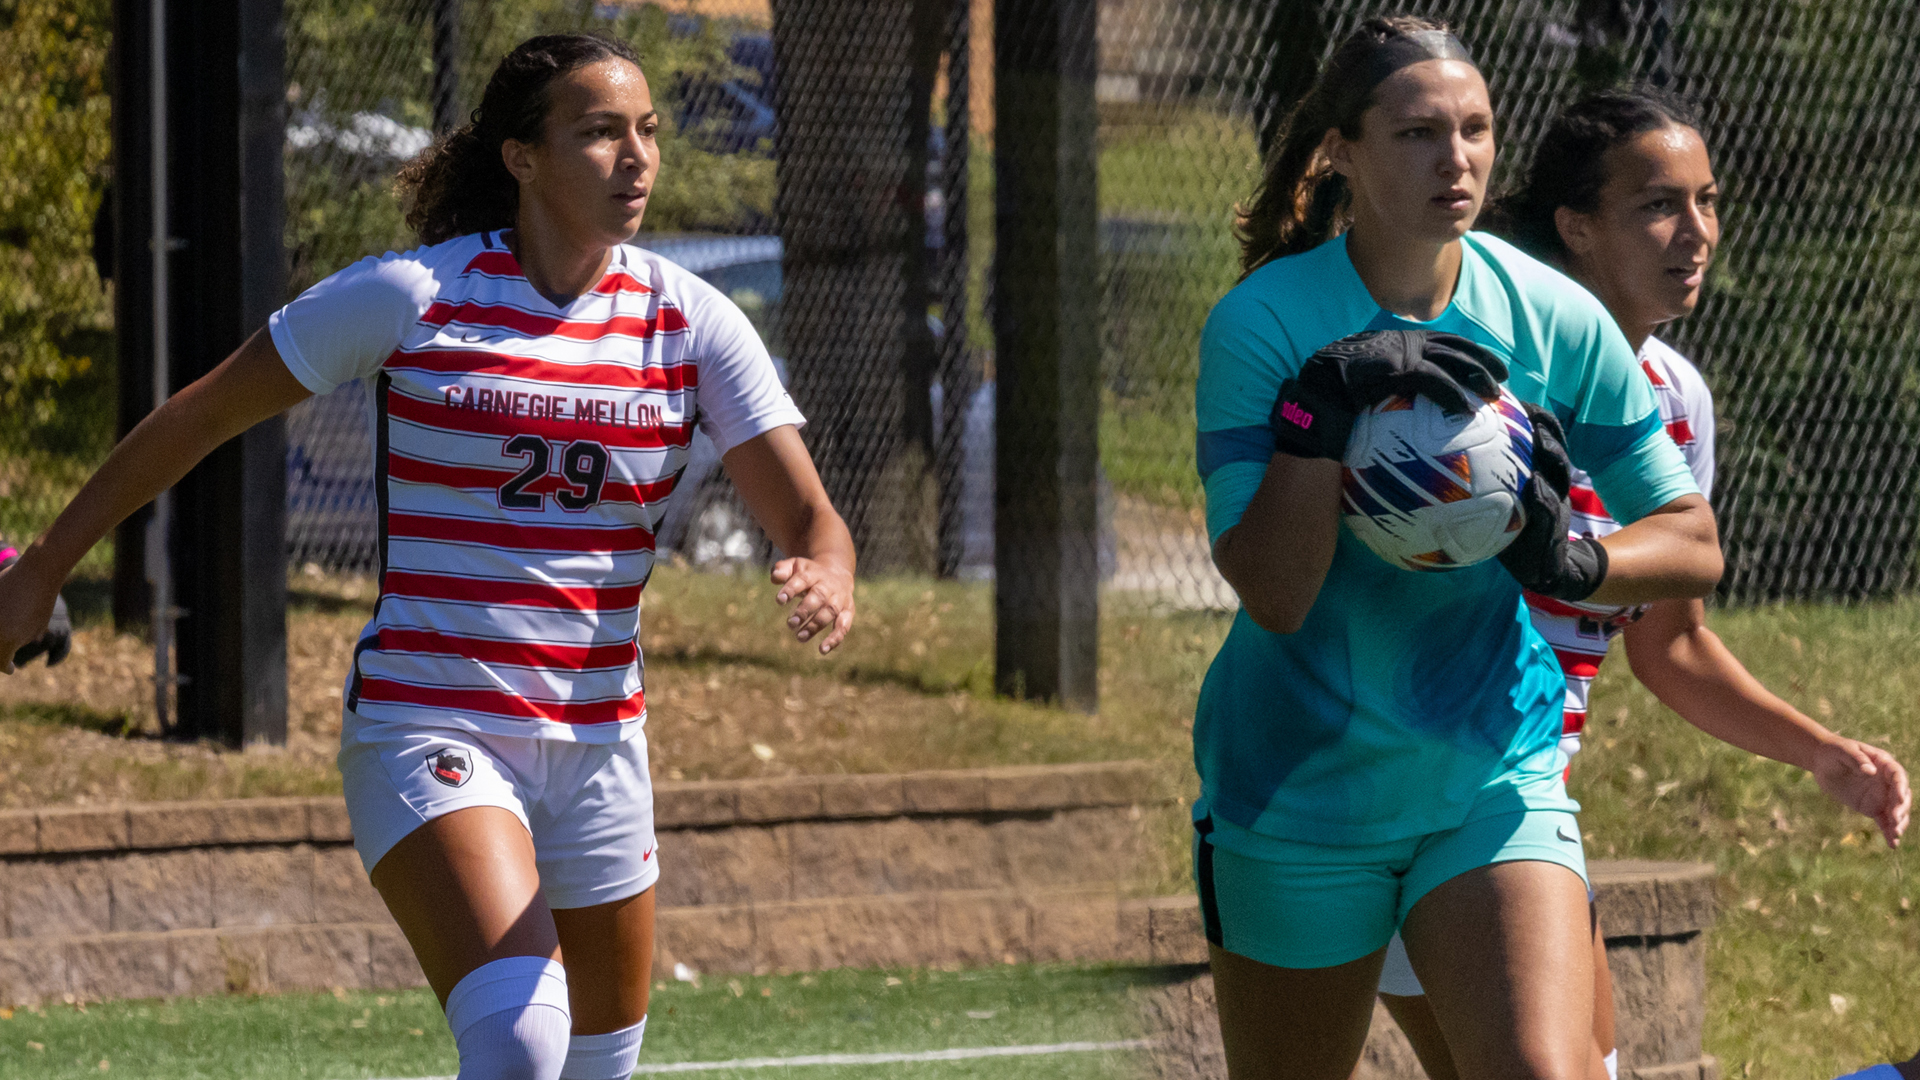 split image of women's soccer players in action during a game